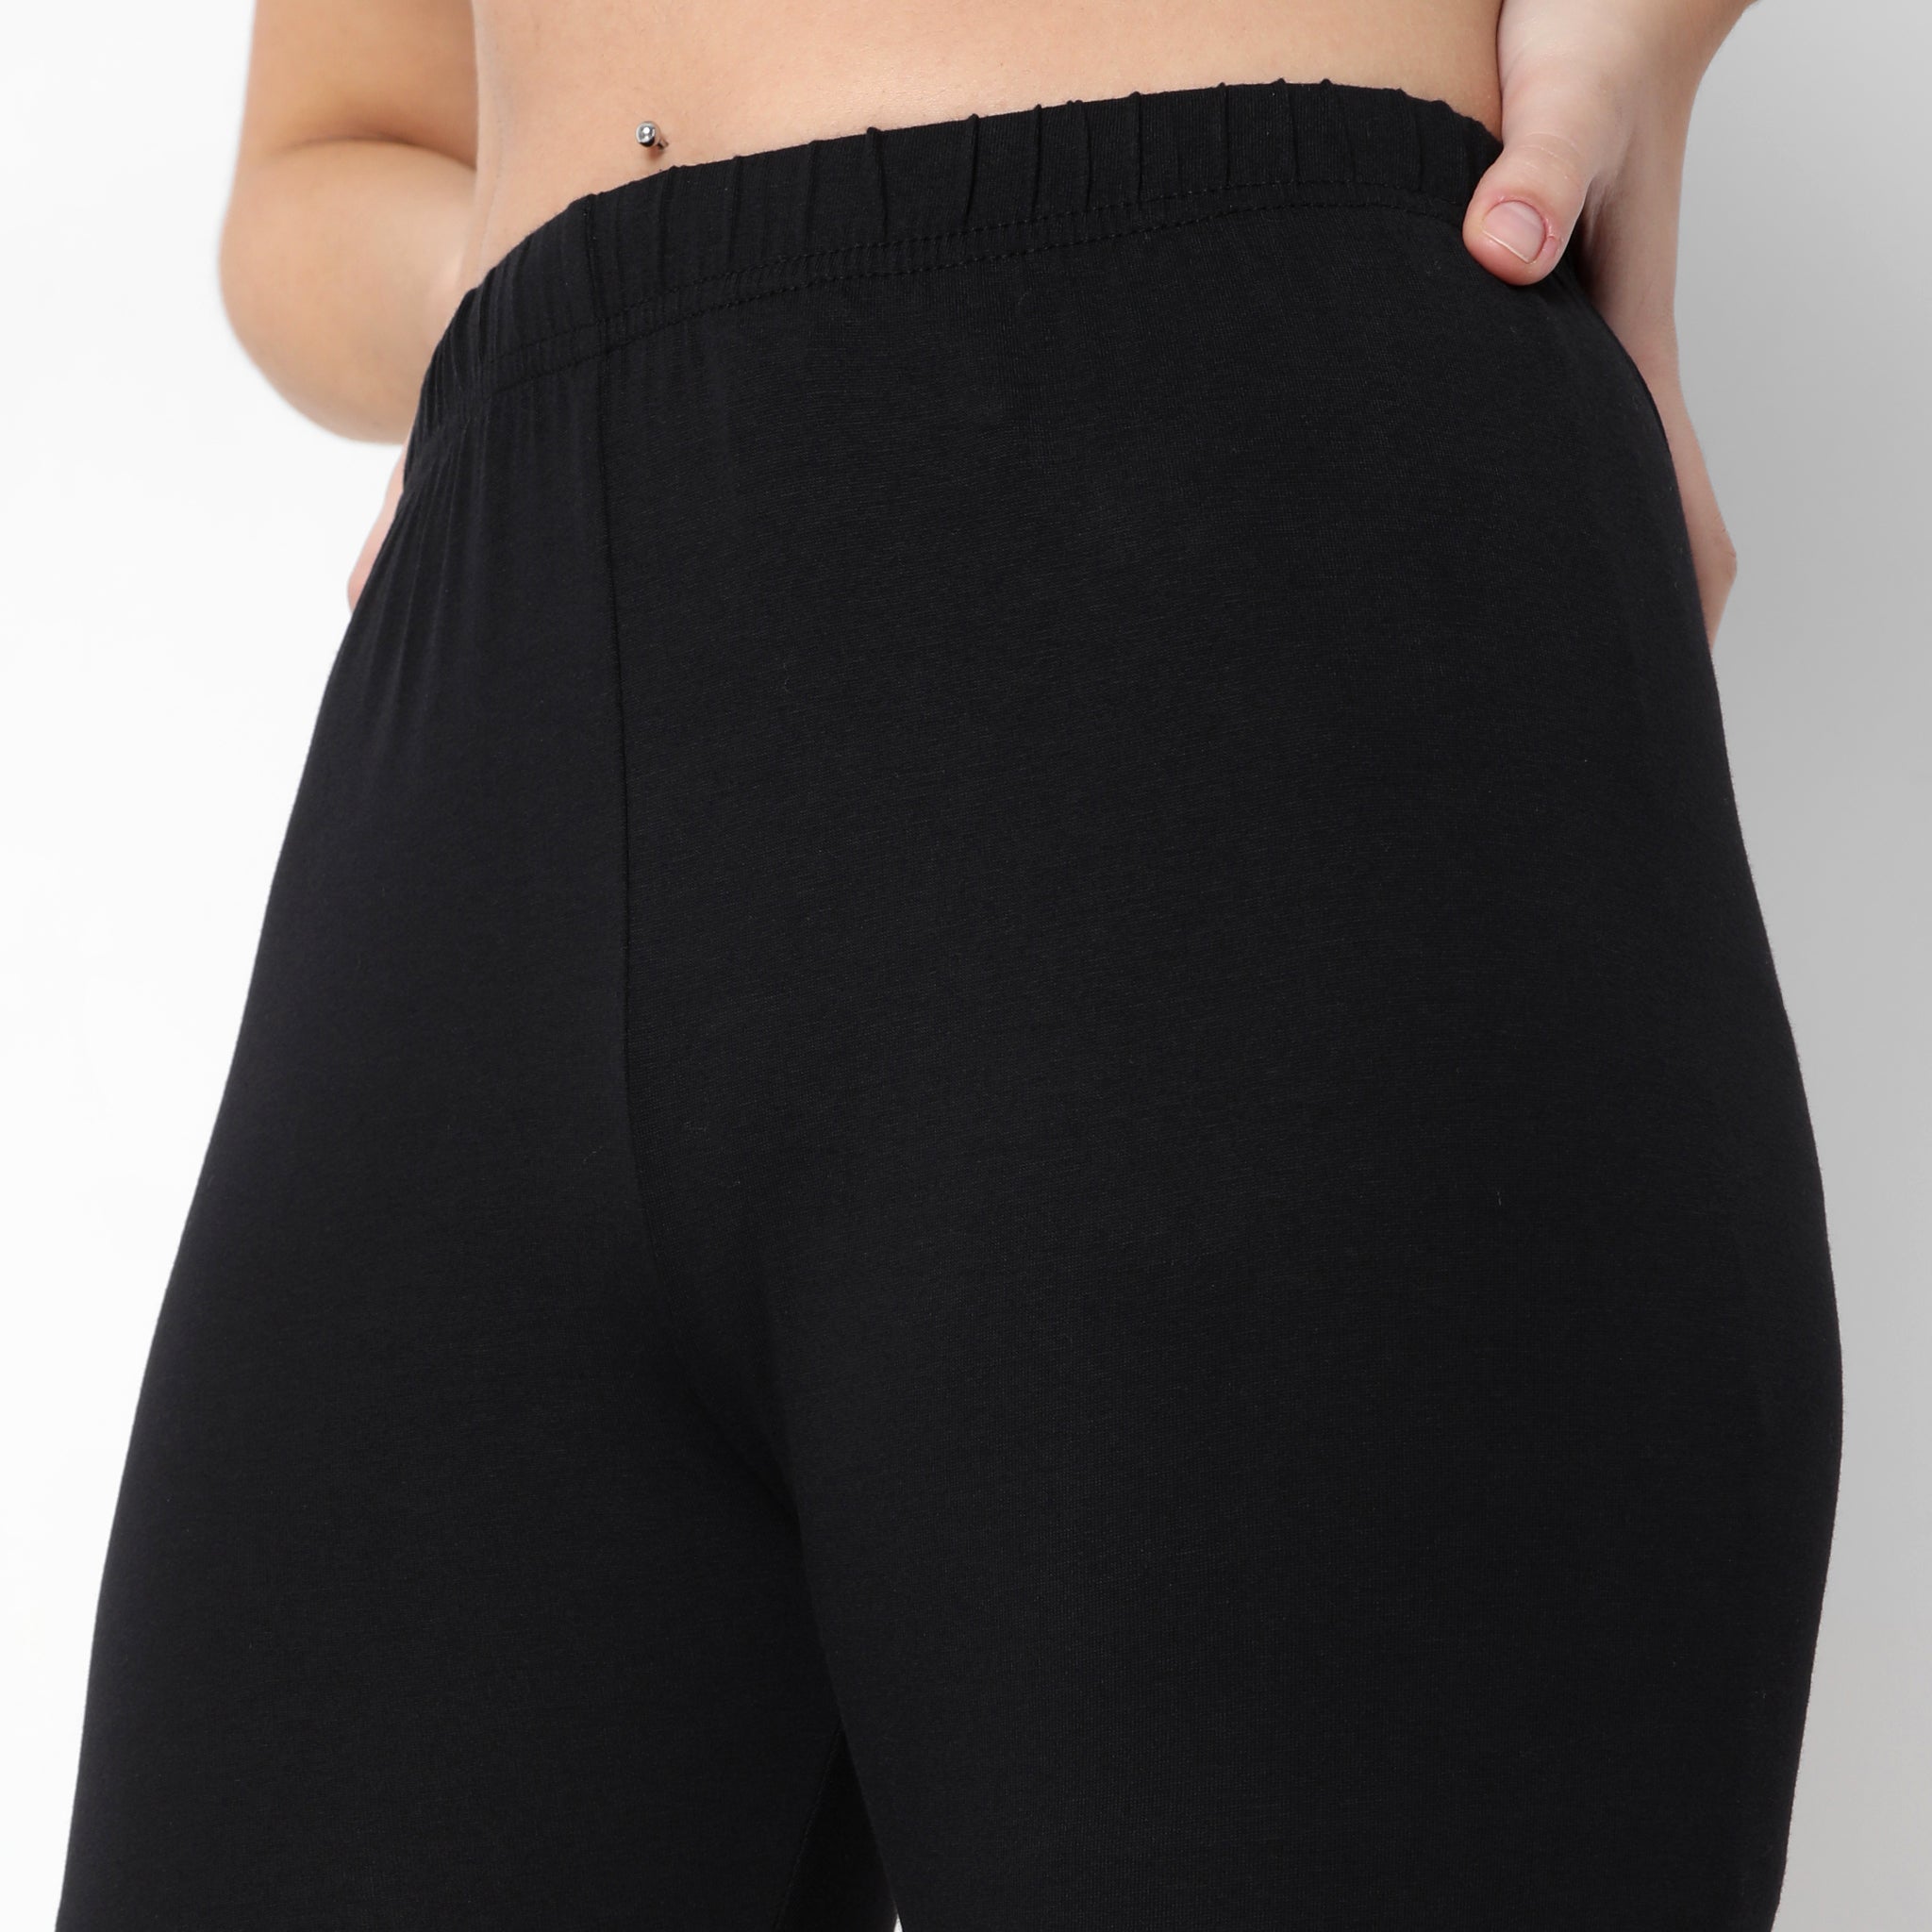 Straight Fit Plain Ladies Black Leggings, Size: XXL at Rs 115 in Indore